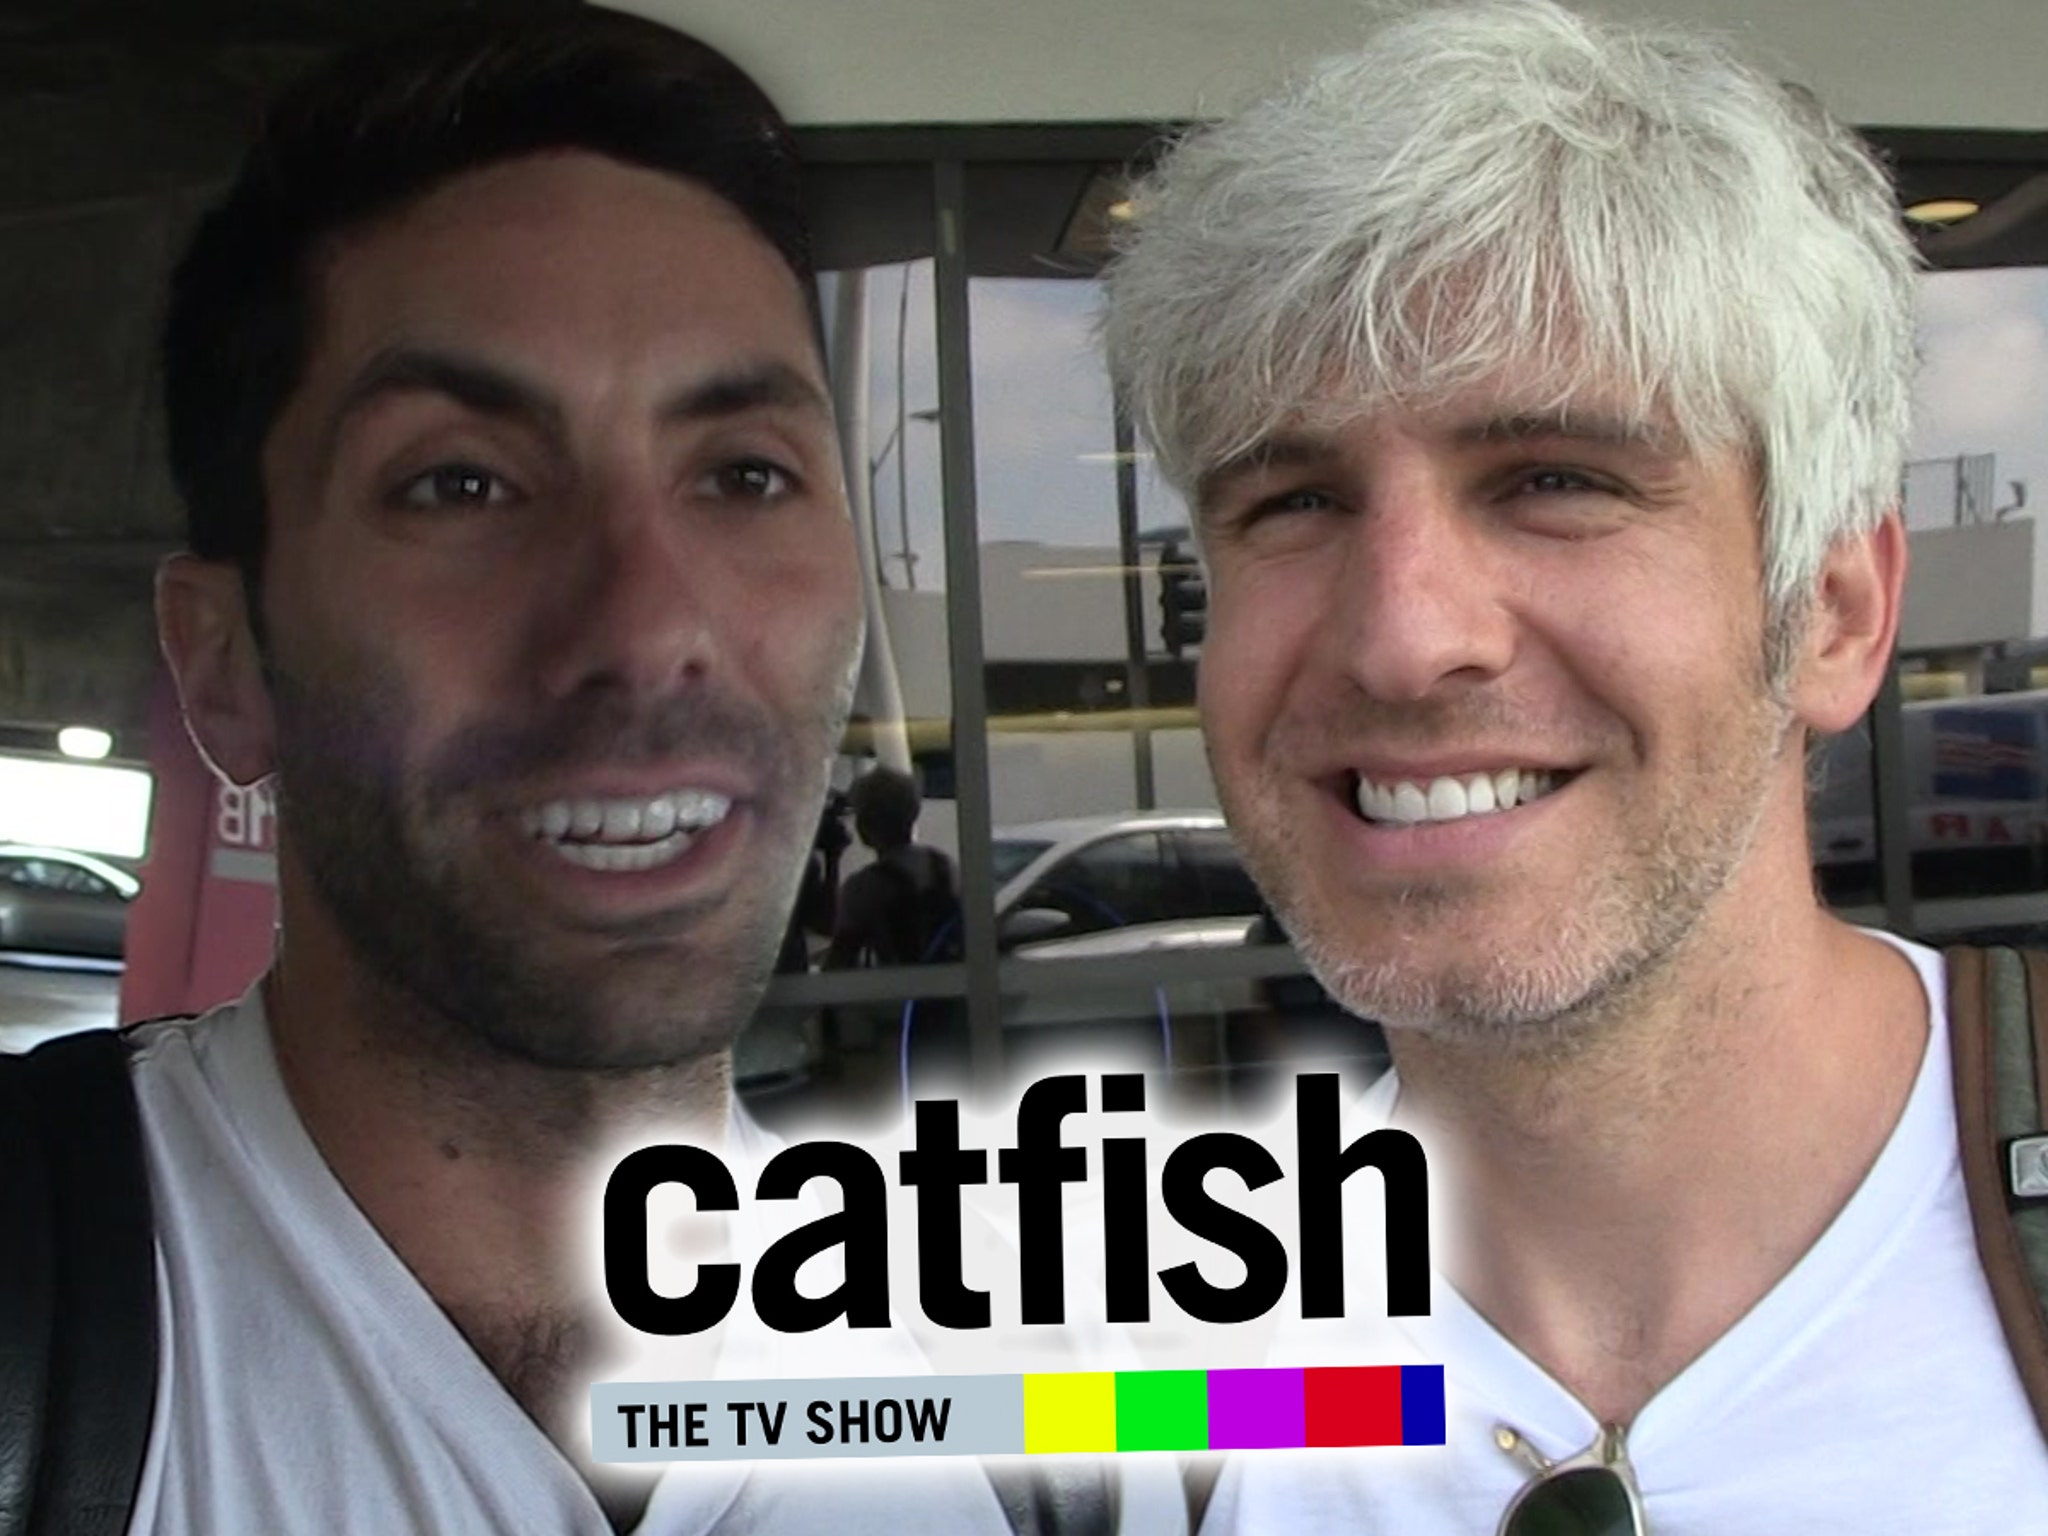 Catfish Series  Check out the New Catfish Series at www